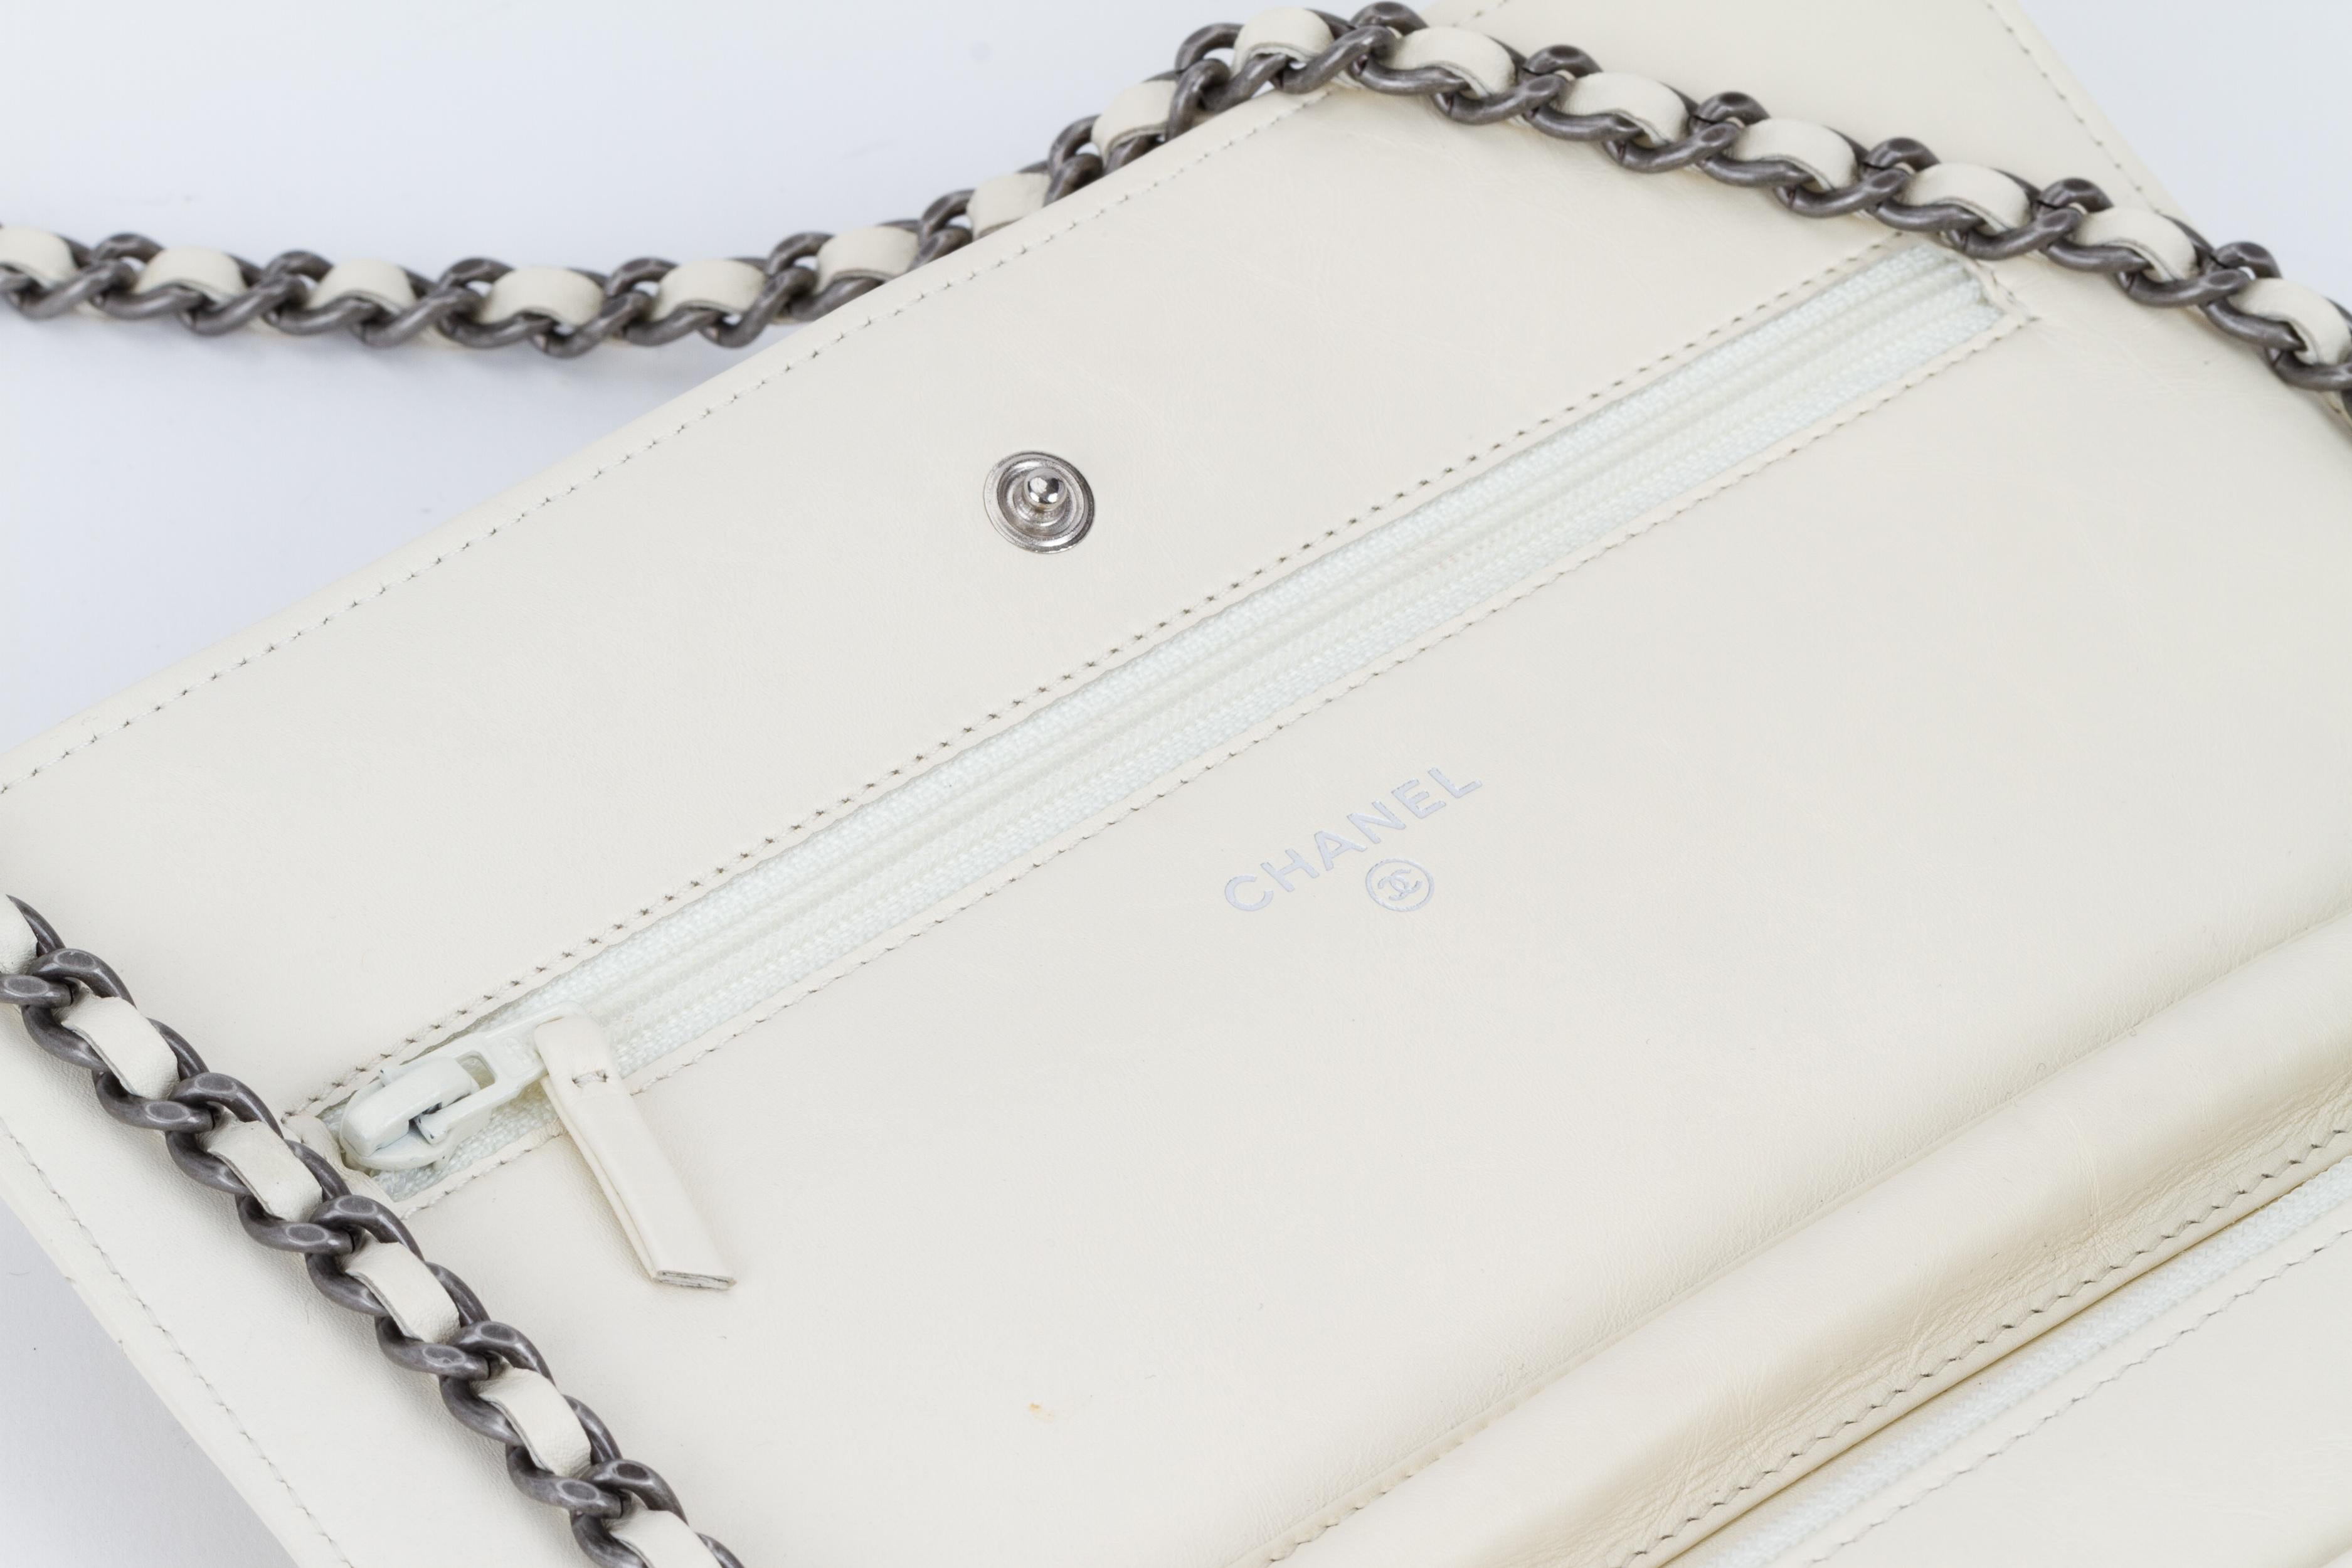 Chanel Reissue White Wallet On A Chain Bag 4